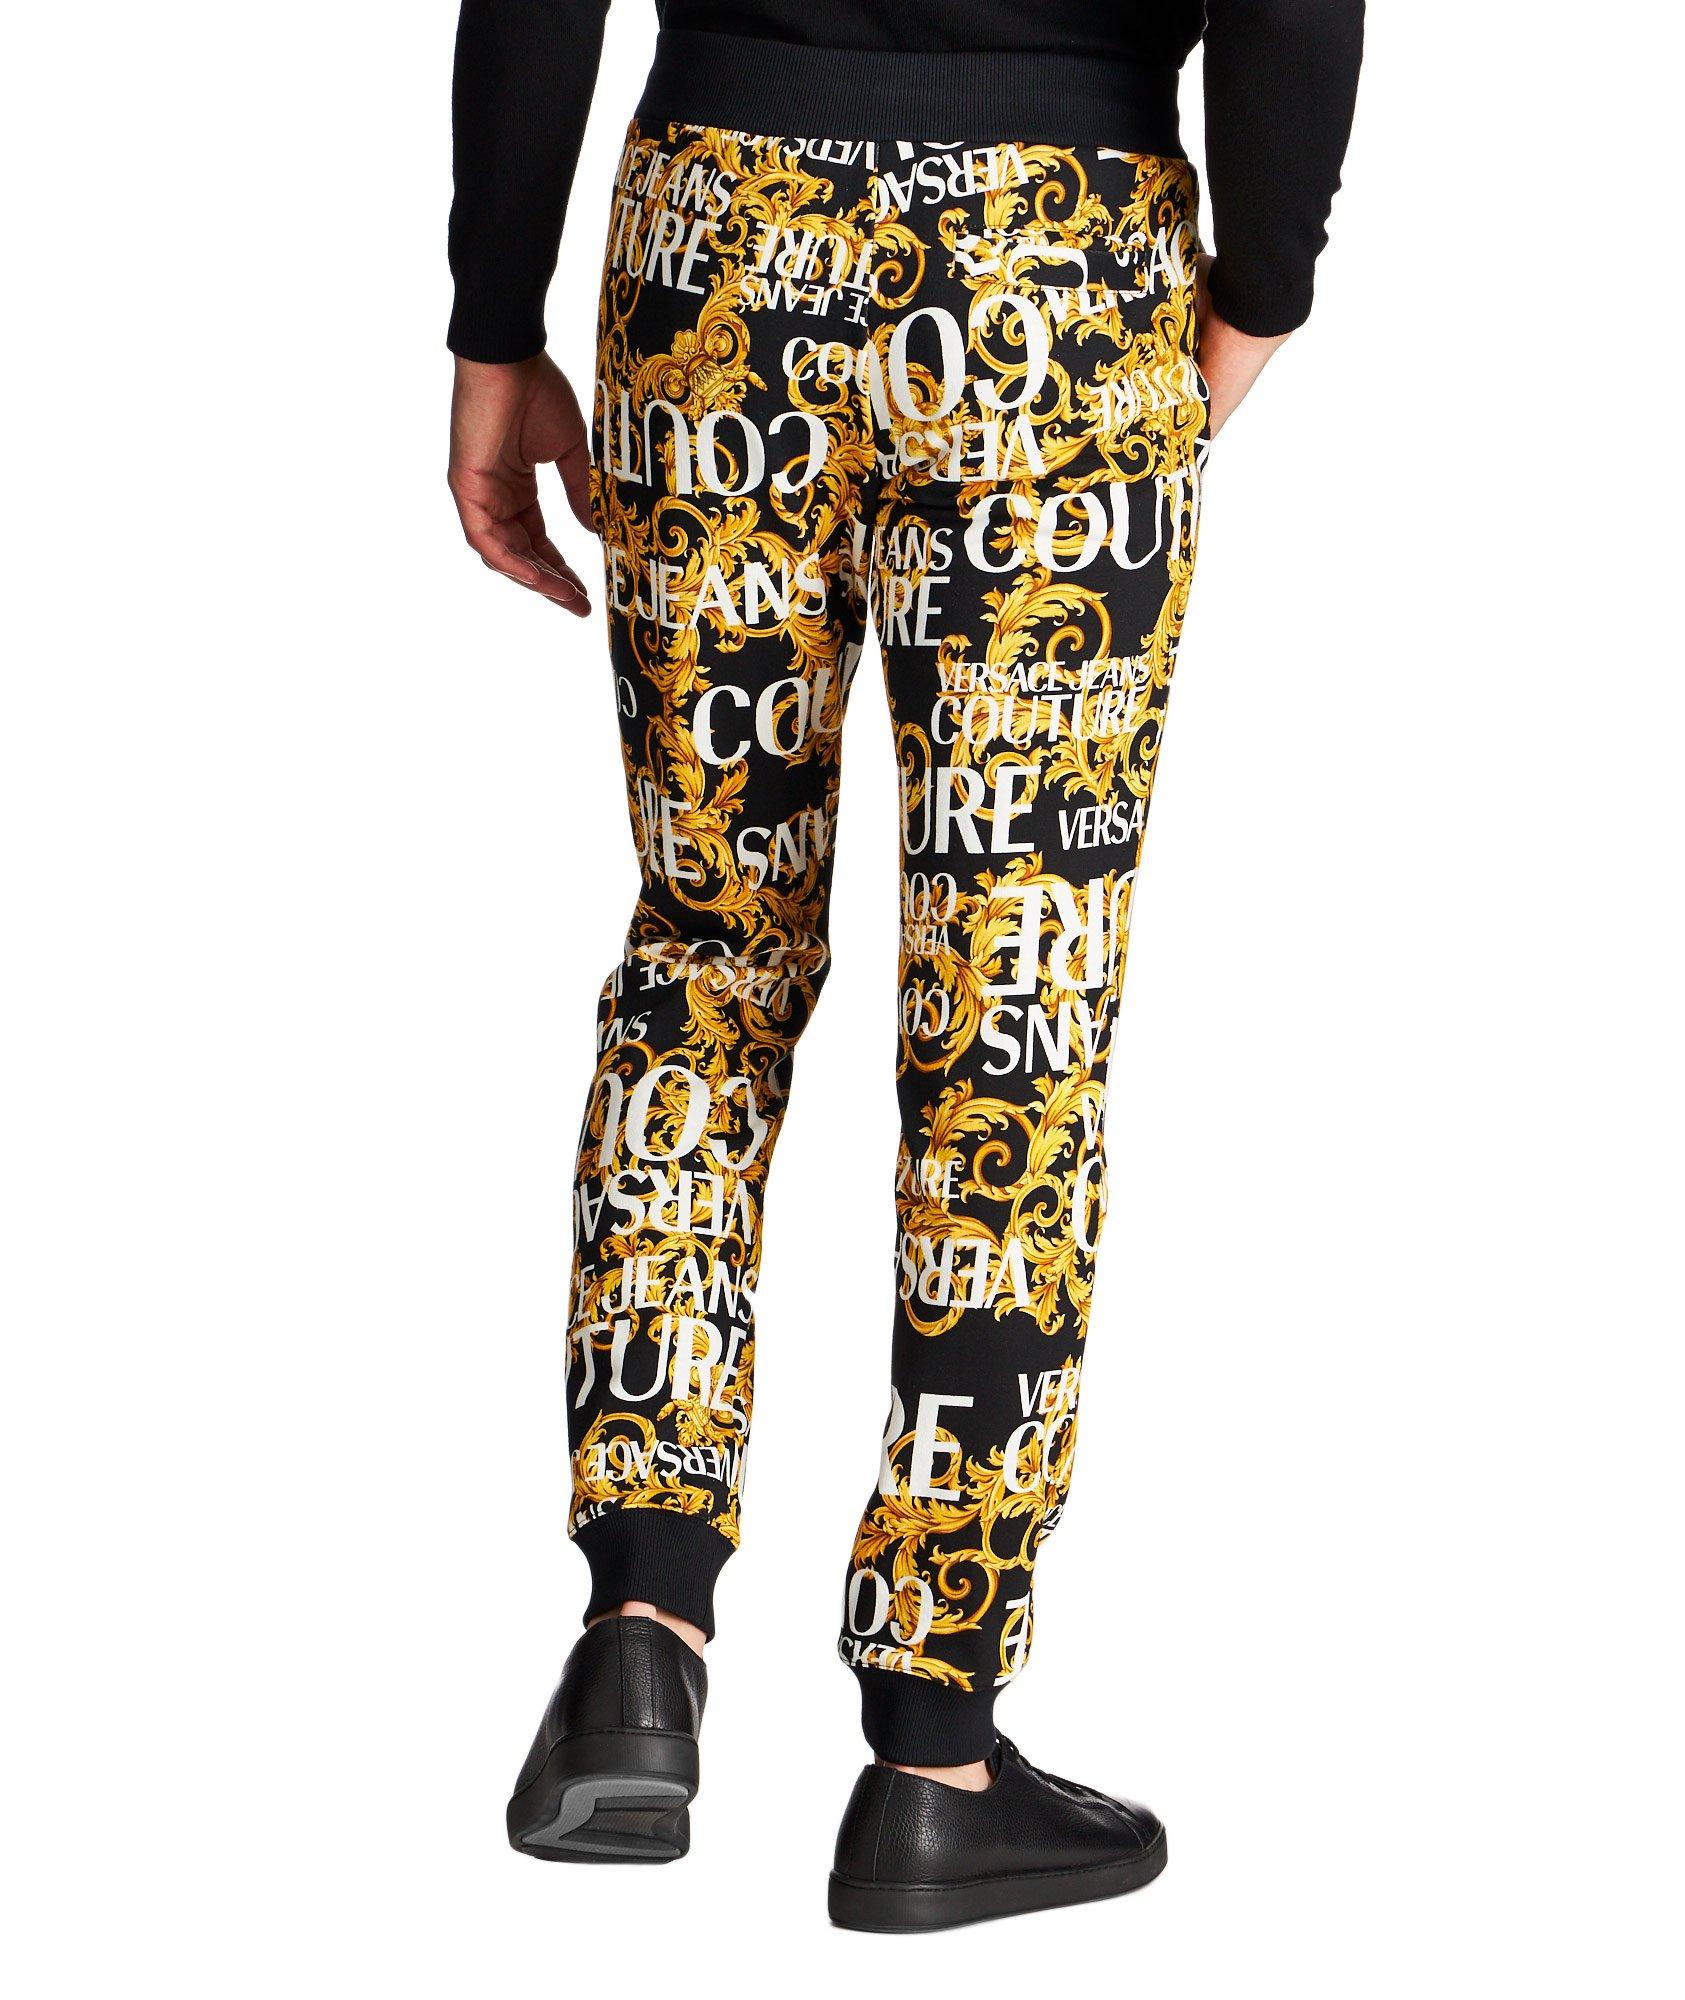 Printed Cotton Joggers  image 1